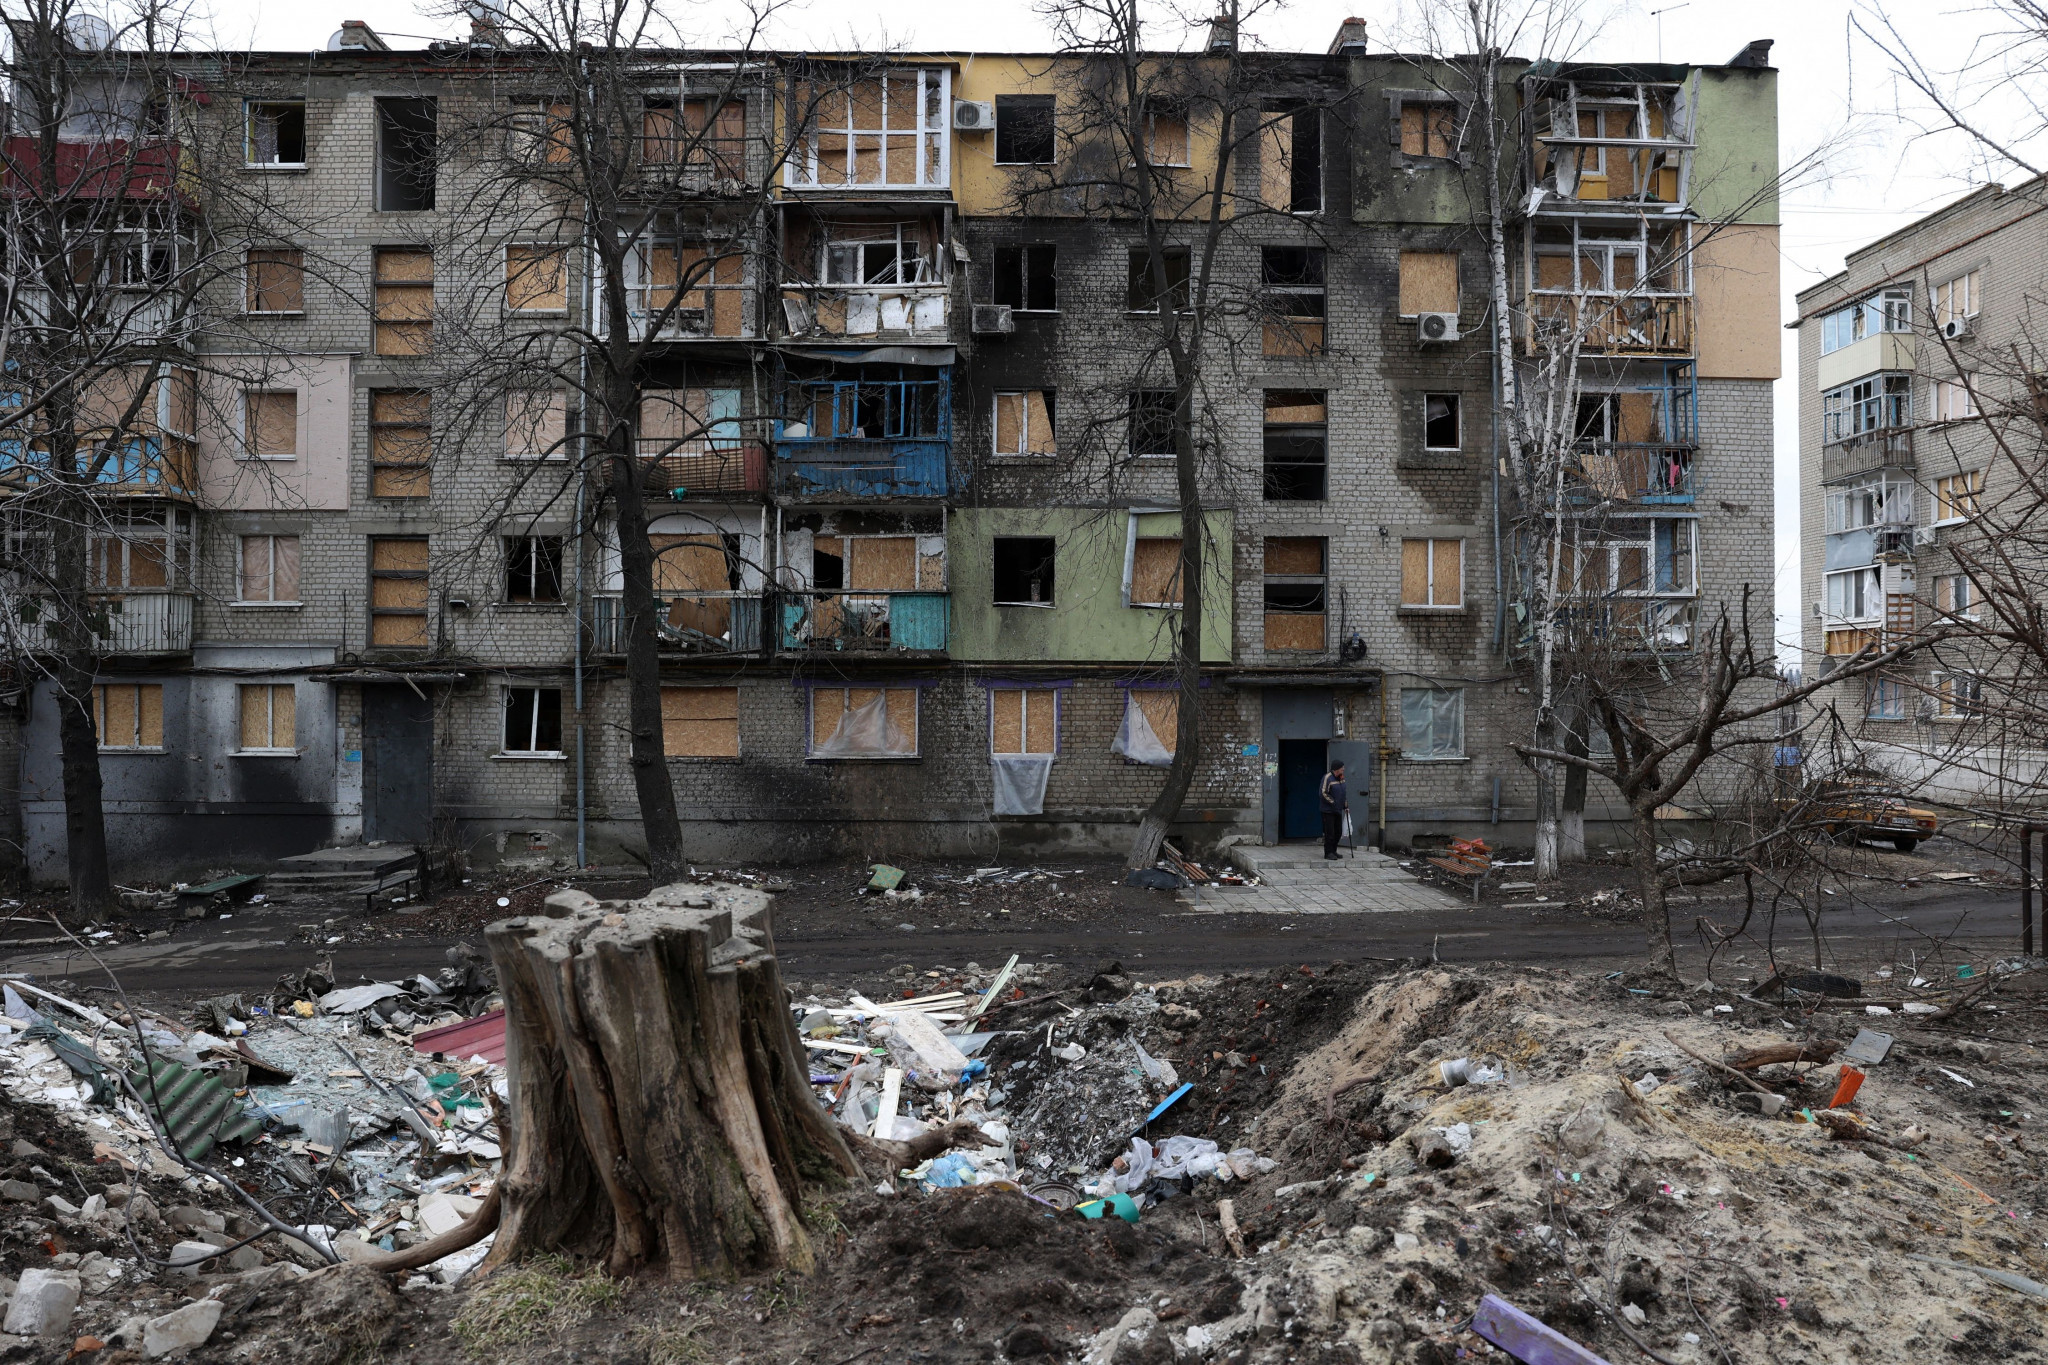 A building has been partially destroyed by Russian shelling in the Ukrainian town of Kupiansk in Kharkiv as Russia continues its military assault ©Getty Images